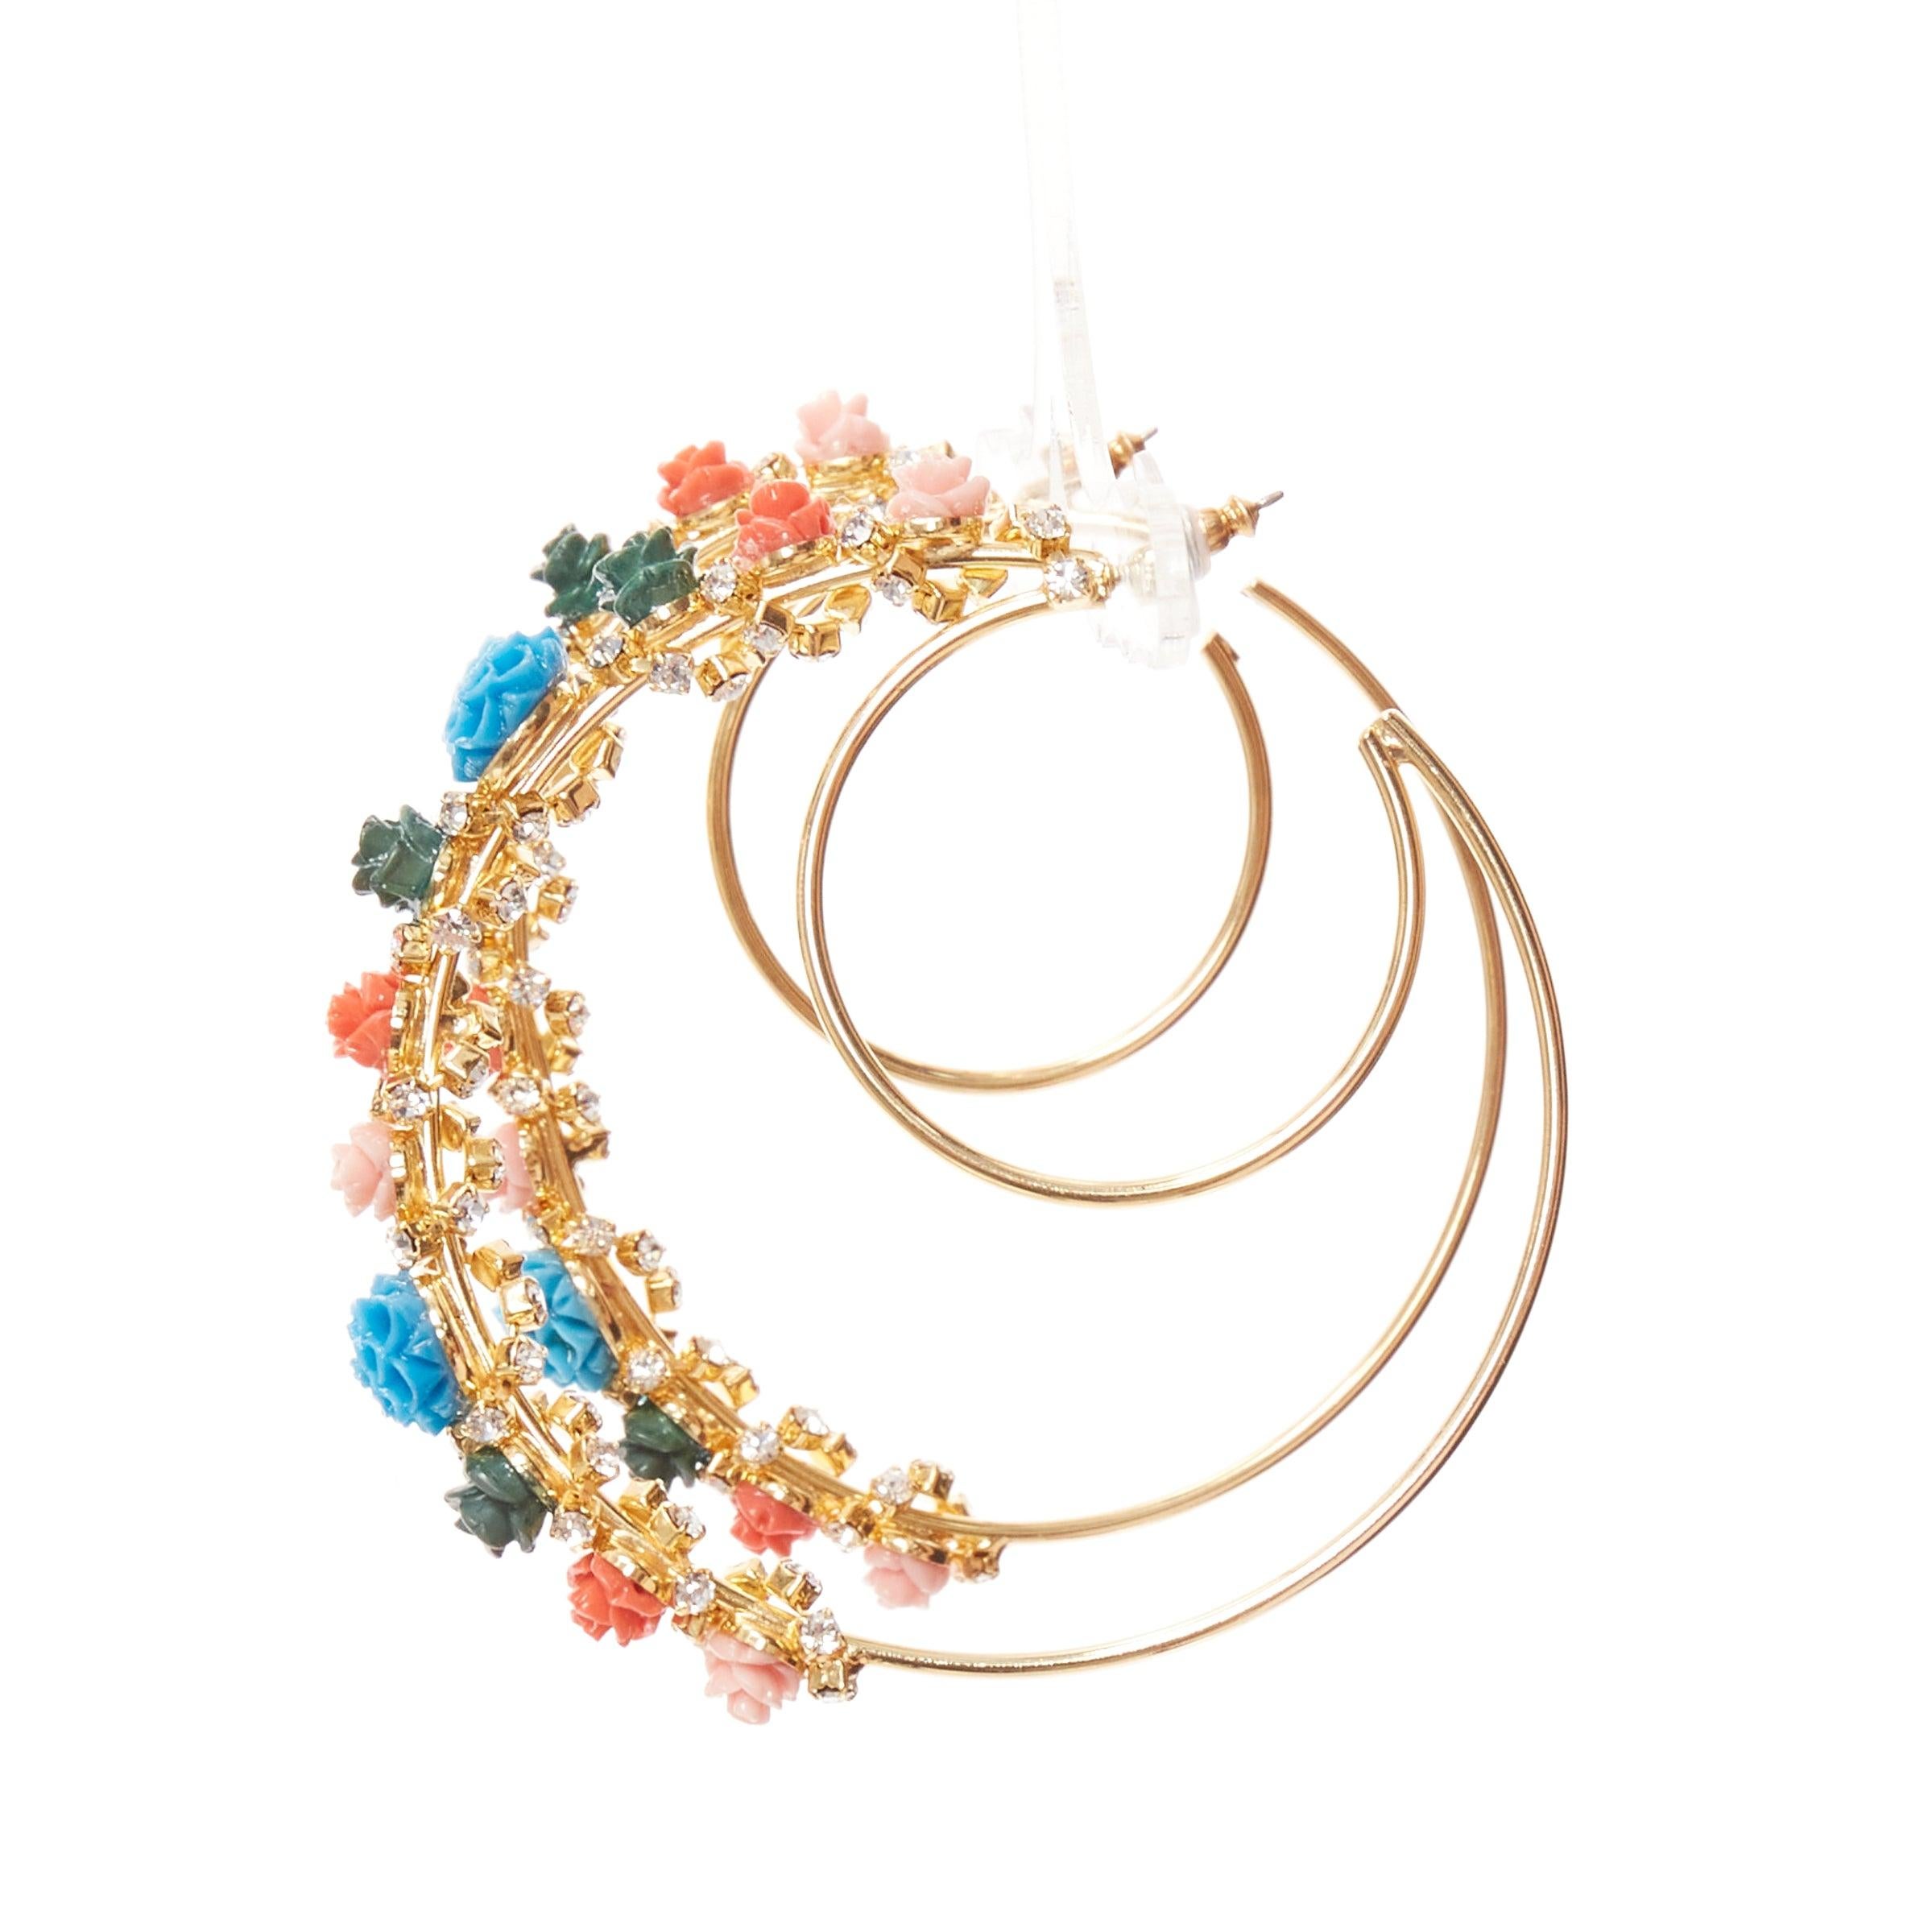 MERCEDES SALAZAR multicolour resin flower embellished moon hoop pin earrings
Reference: AAWC/A01263
Brand: Mercedes Salazar
Material: Metal, Resin
Color: Gold, Multicolour
Pattern: Floral
Closure: Pin
Lining: Gold Metal

CONDITION:
Condition: Poor,